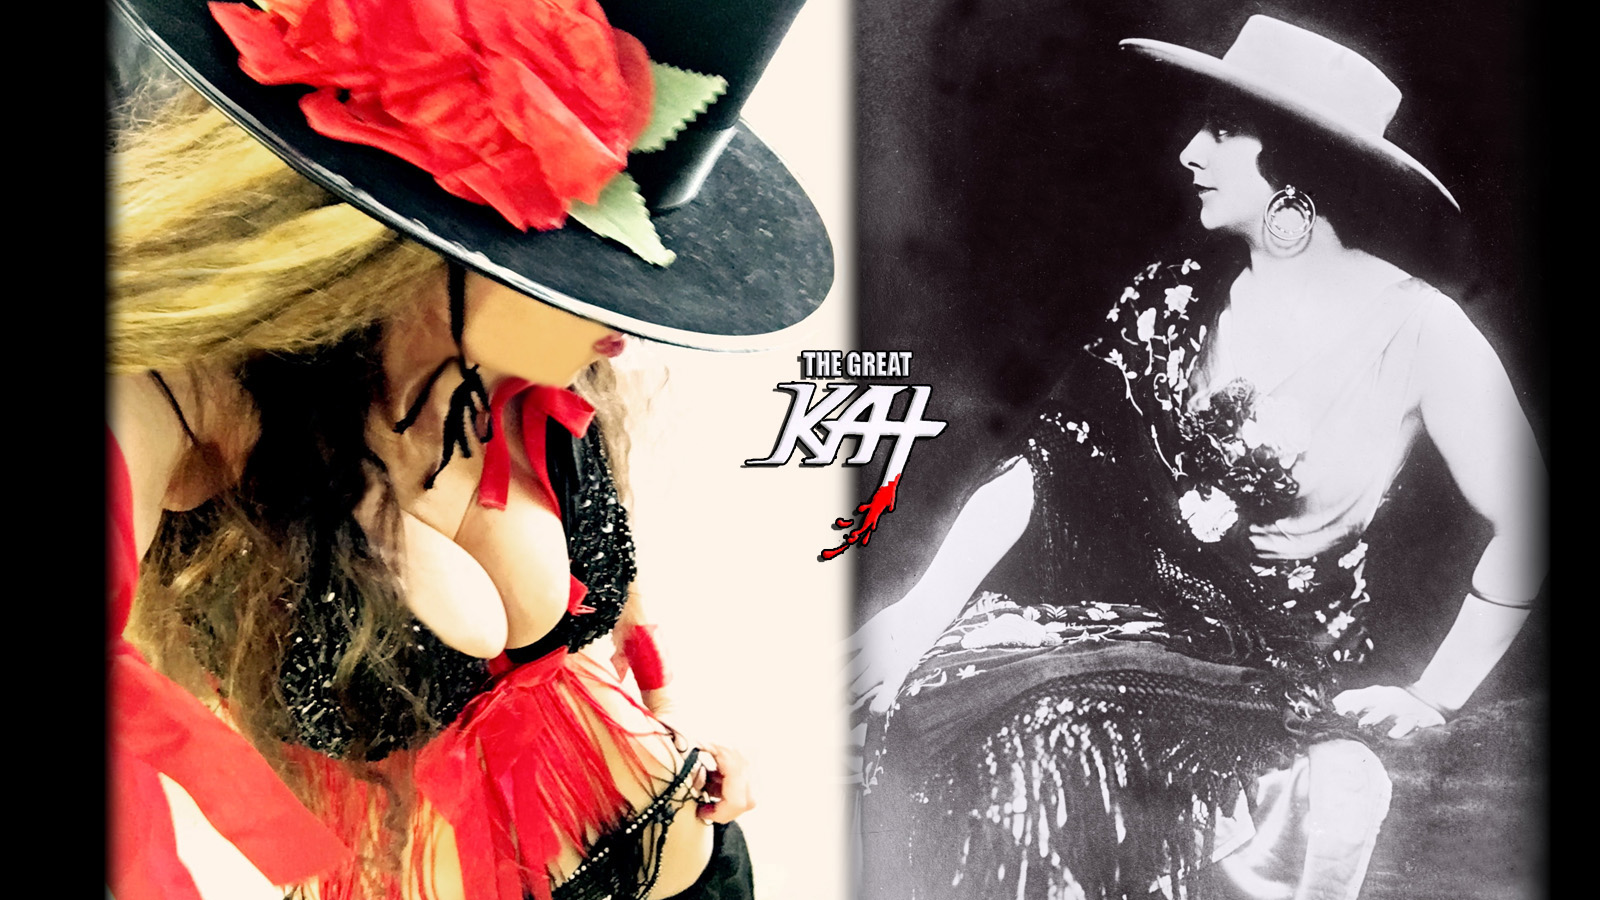 CARMEN -  THEN AND NOW! The Great Kat's SARASATE'S "CARMEN FANTASY" MUSIC VIDEO!